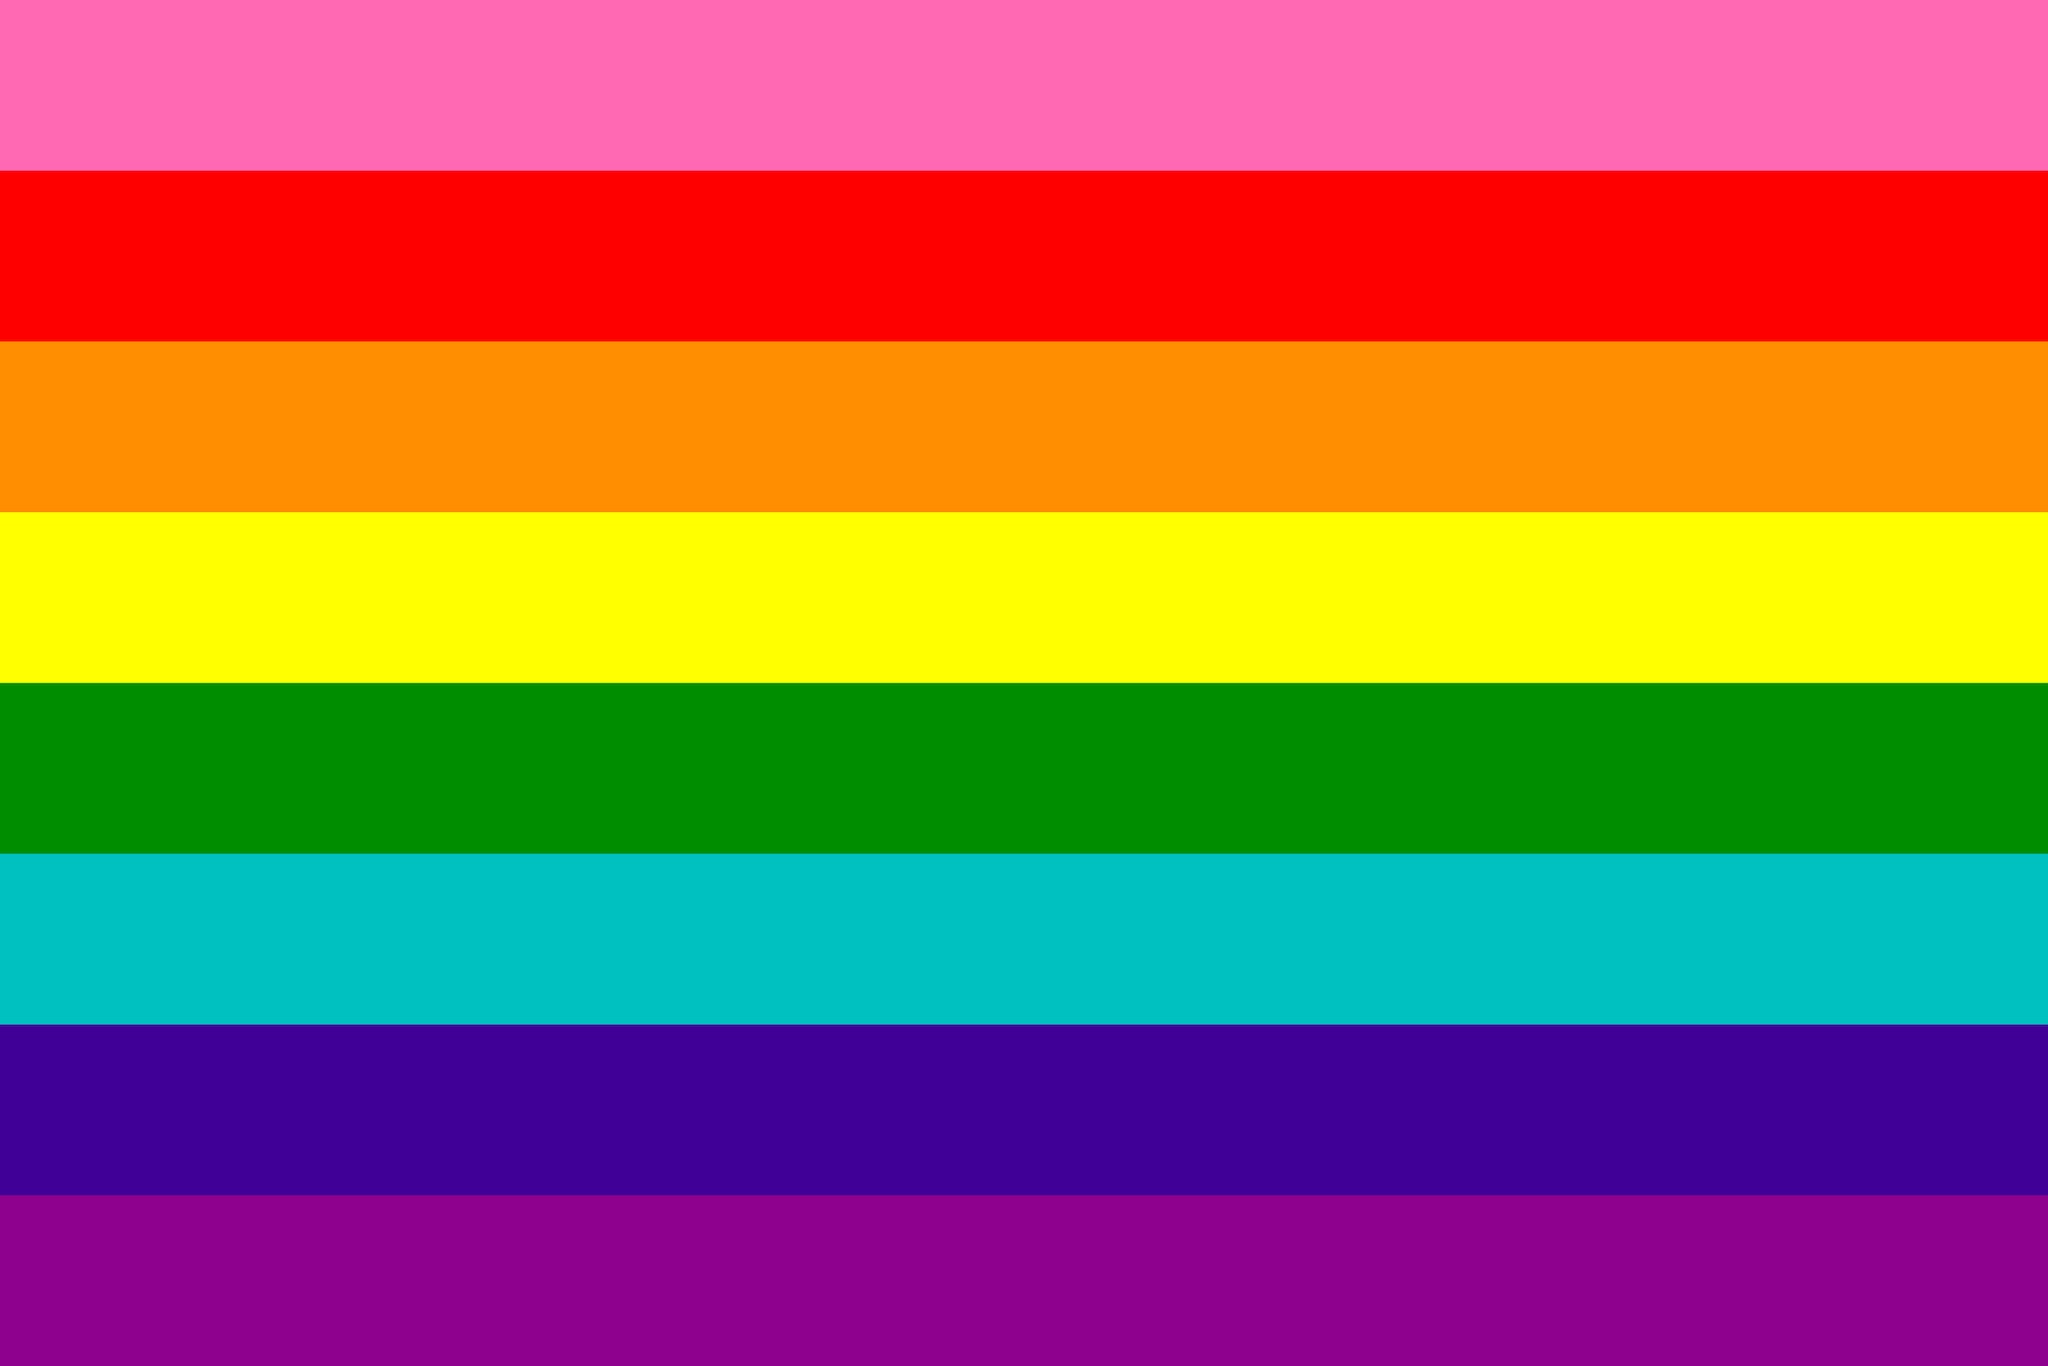 in what year was the gay pride flag popularized